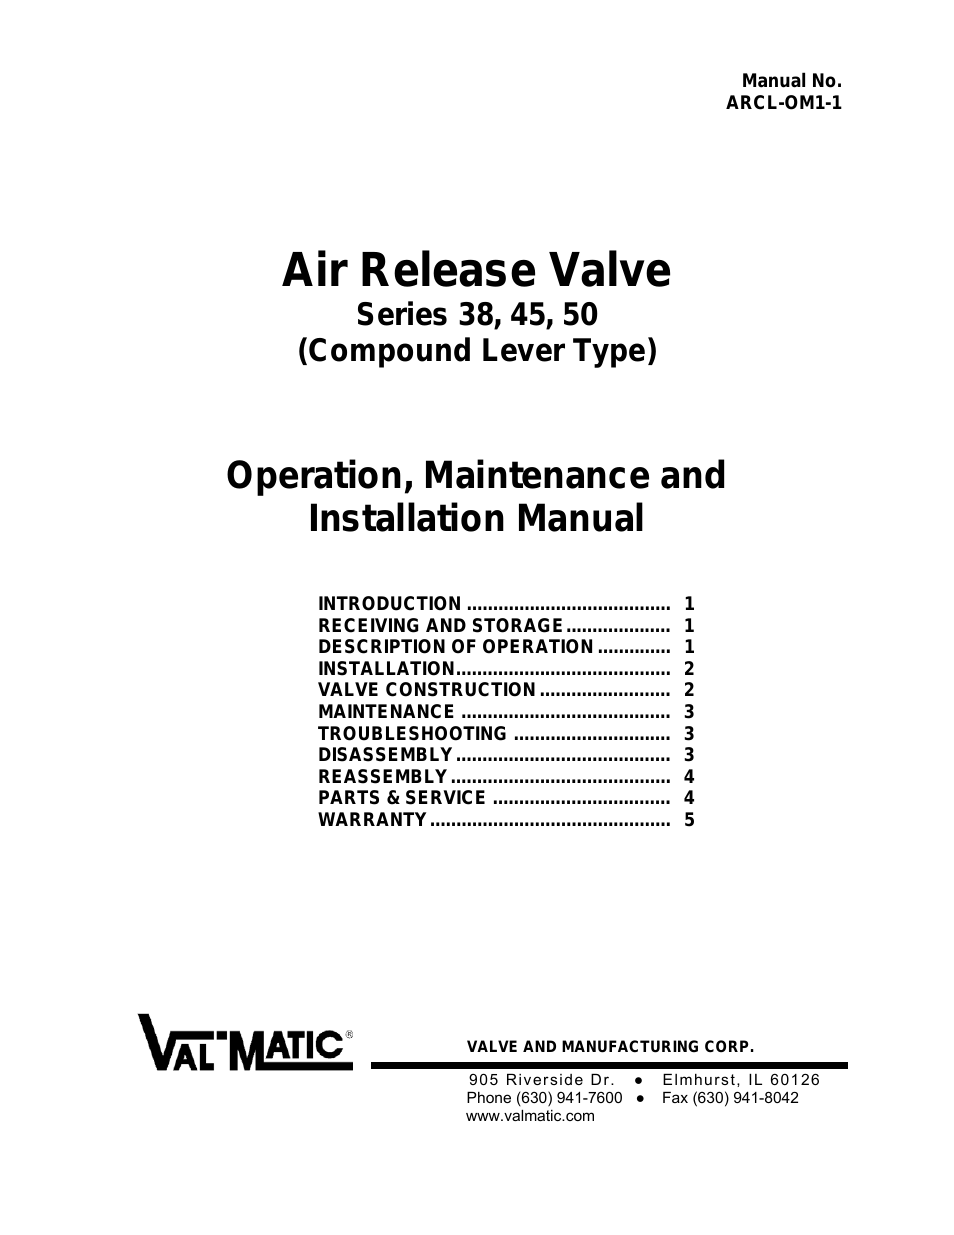 38 Series Air Release Valve (Compound Lever Type)